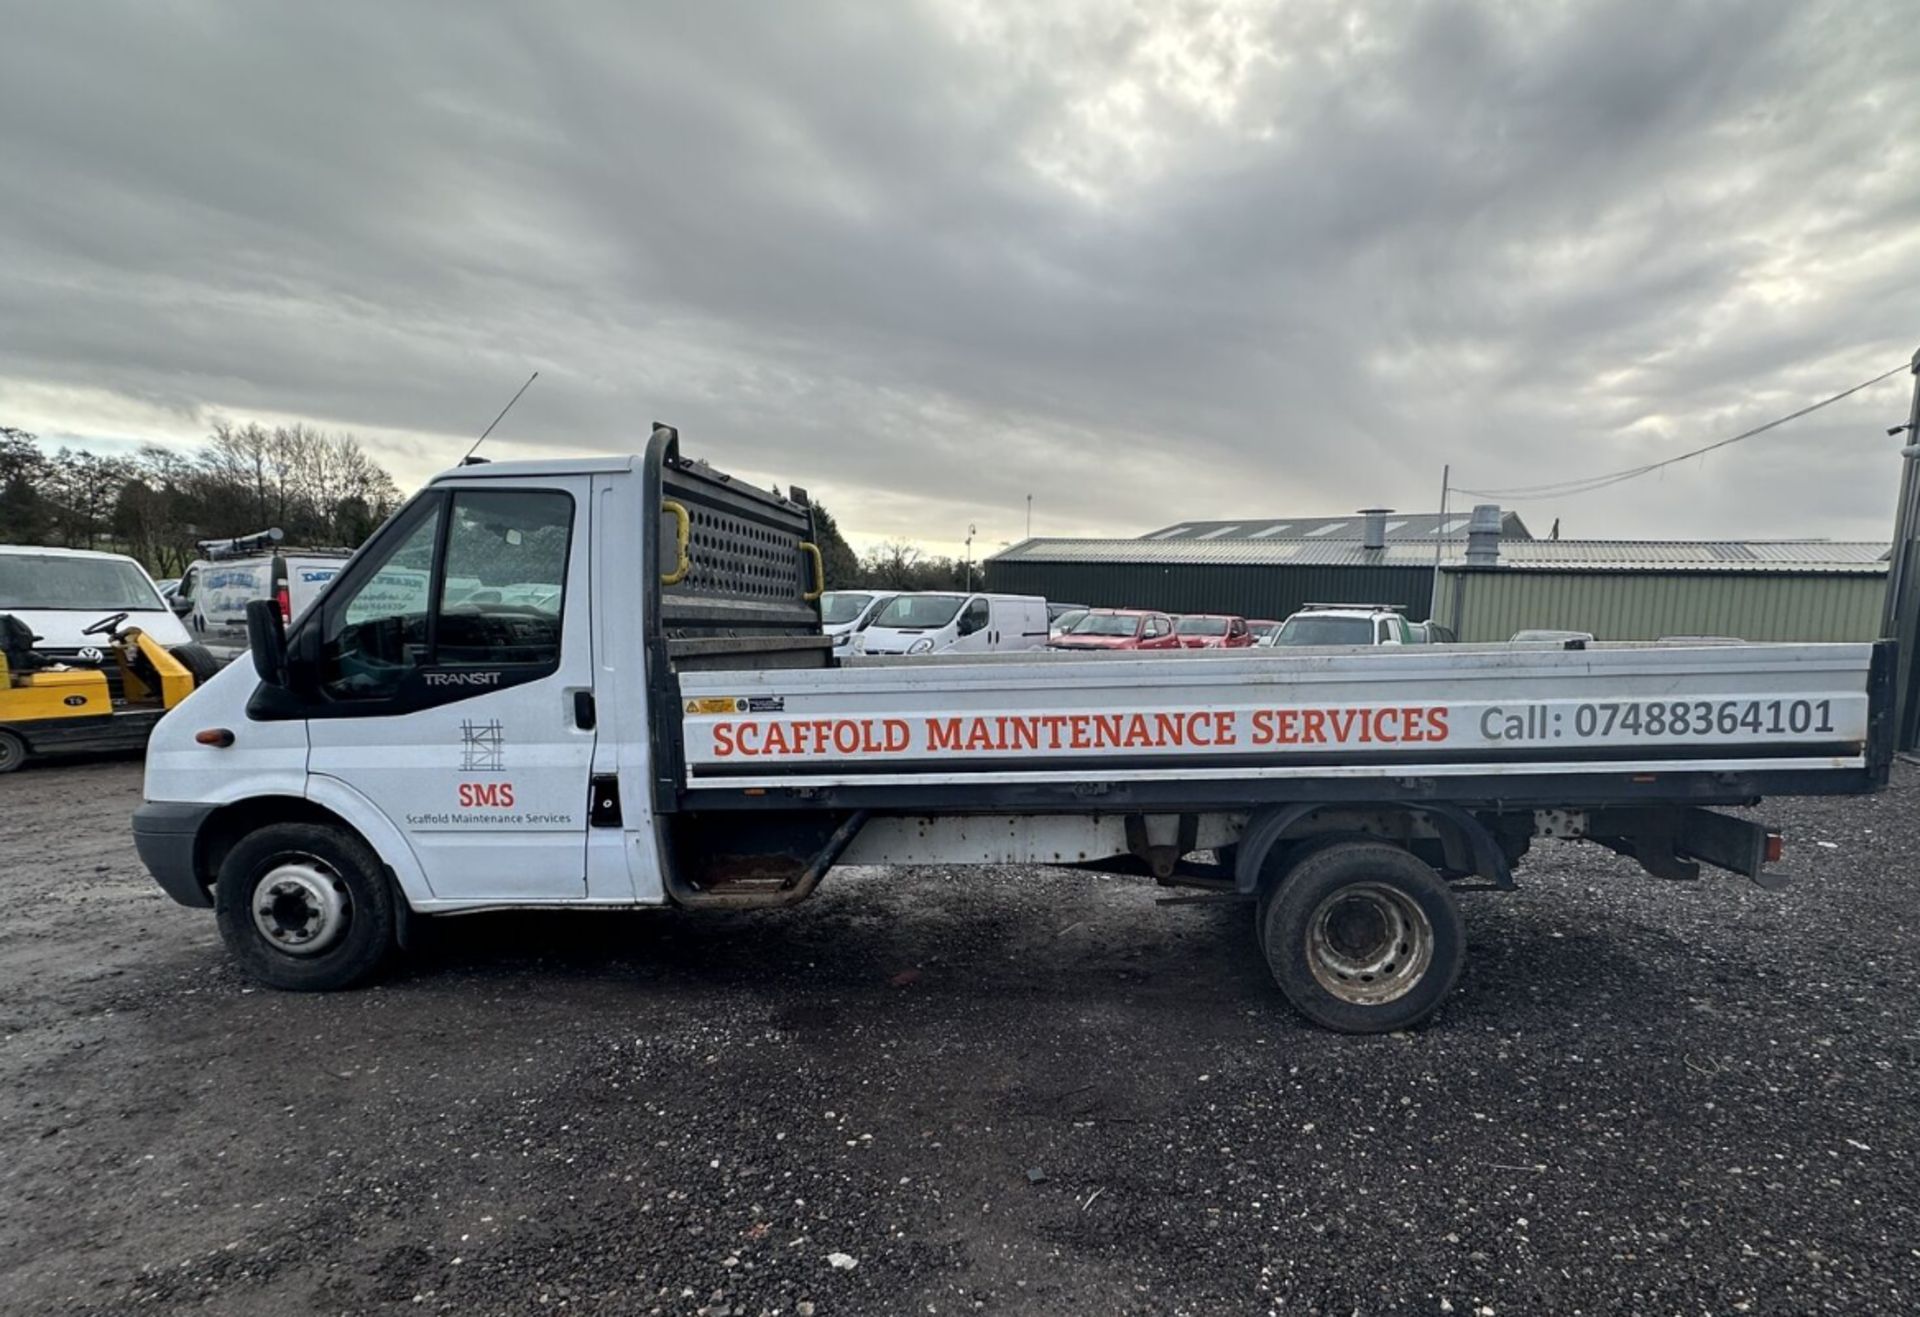 WHITE KNIGHT, FLATBED PLIGHT: 2012 TRANSIT - SPARES OR REPAIRS SPECIA >>--NO VAT ON HAMMER--<< - Image 2 of 18